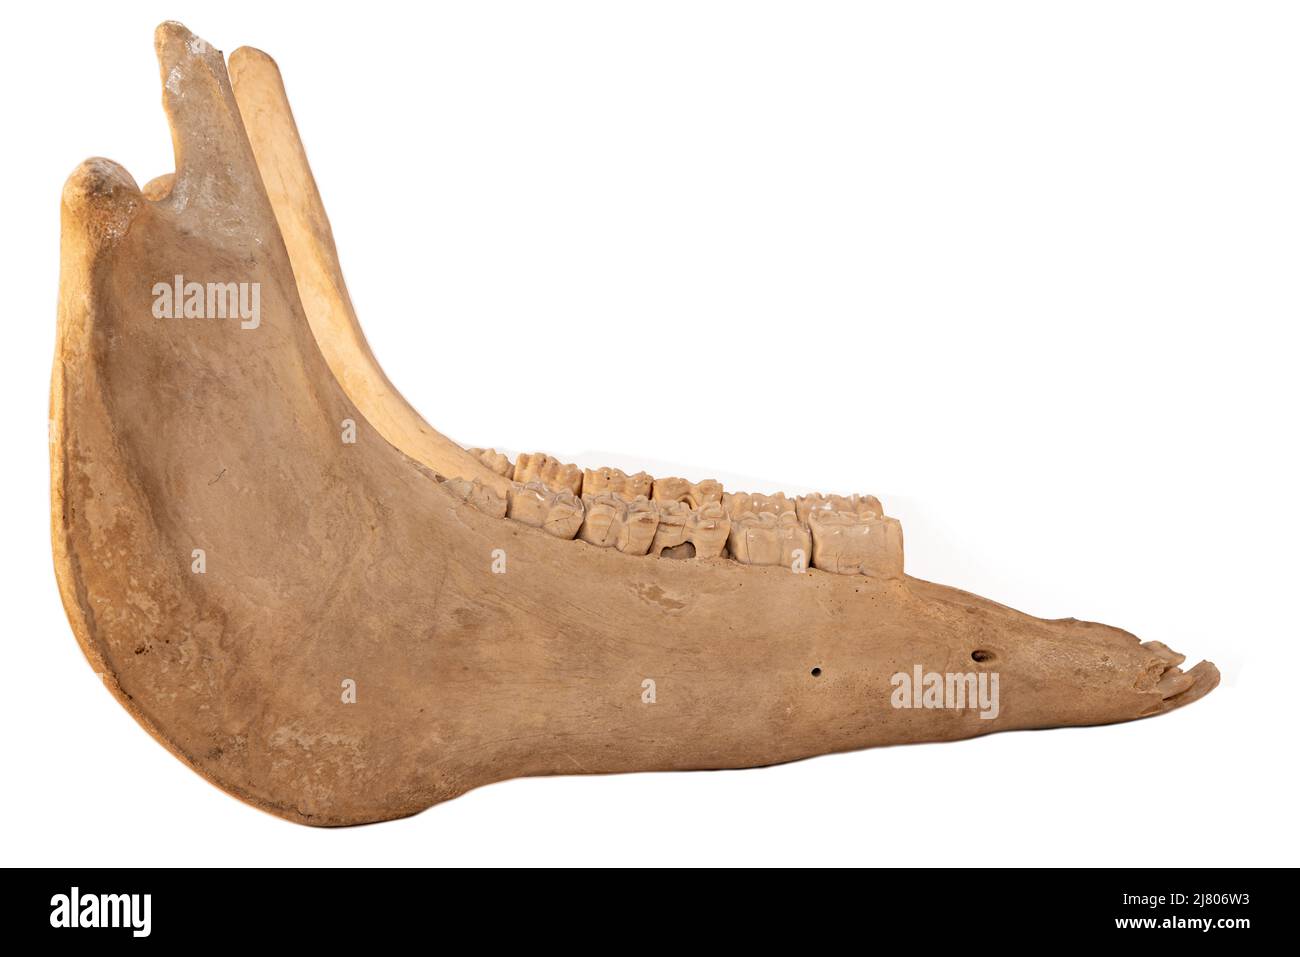 Lower jaw of domestic horse on a white background.  Side view. Stock Photo